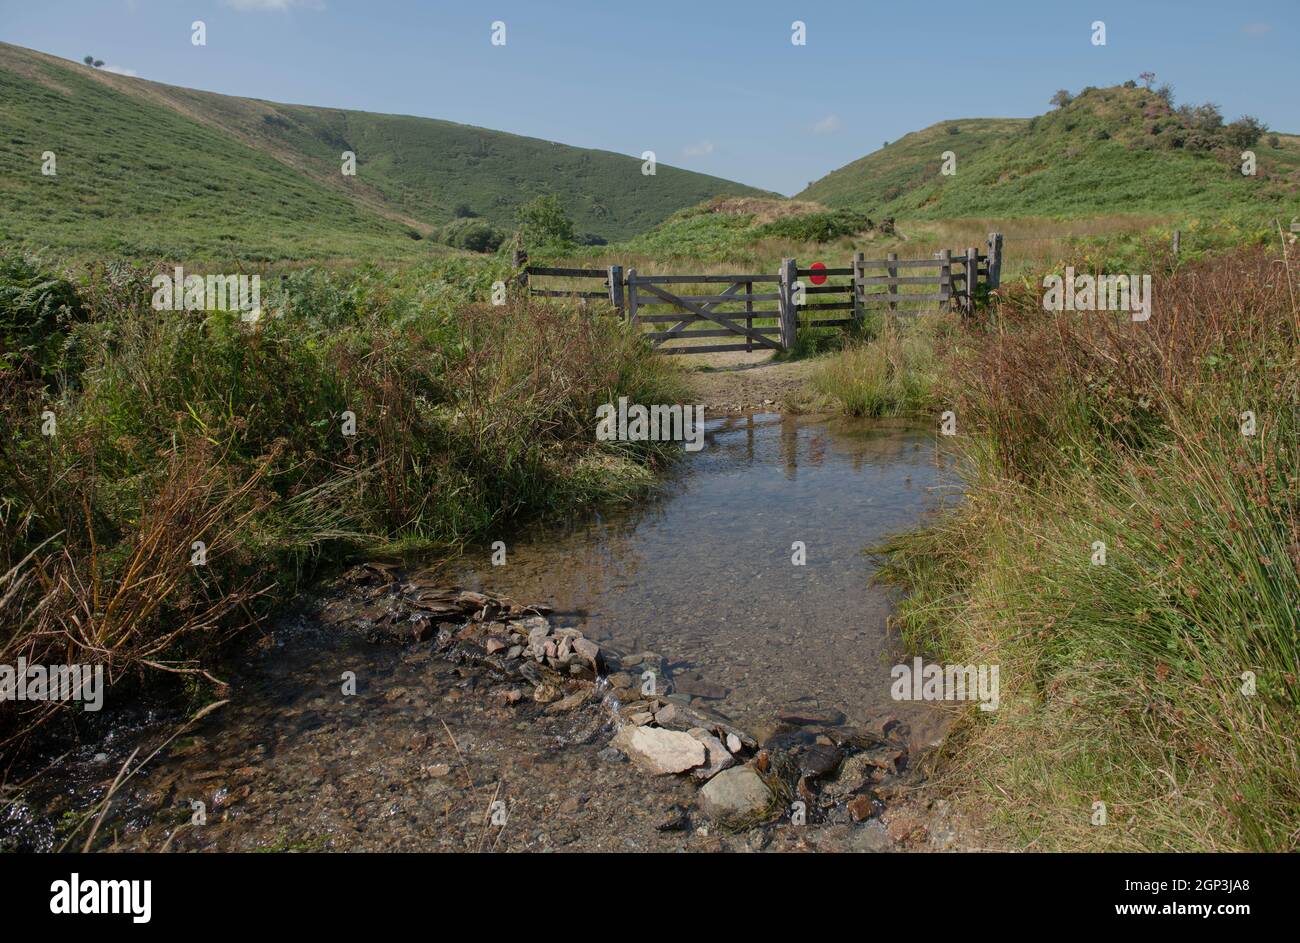 Small Stream of Flowing Water with Stepping Stones and a Wooden Fence and Gate in the Background in the River Barle Valley within Exmoor National Park Stock Photo